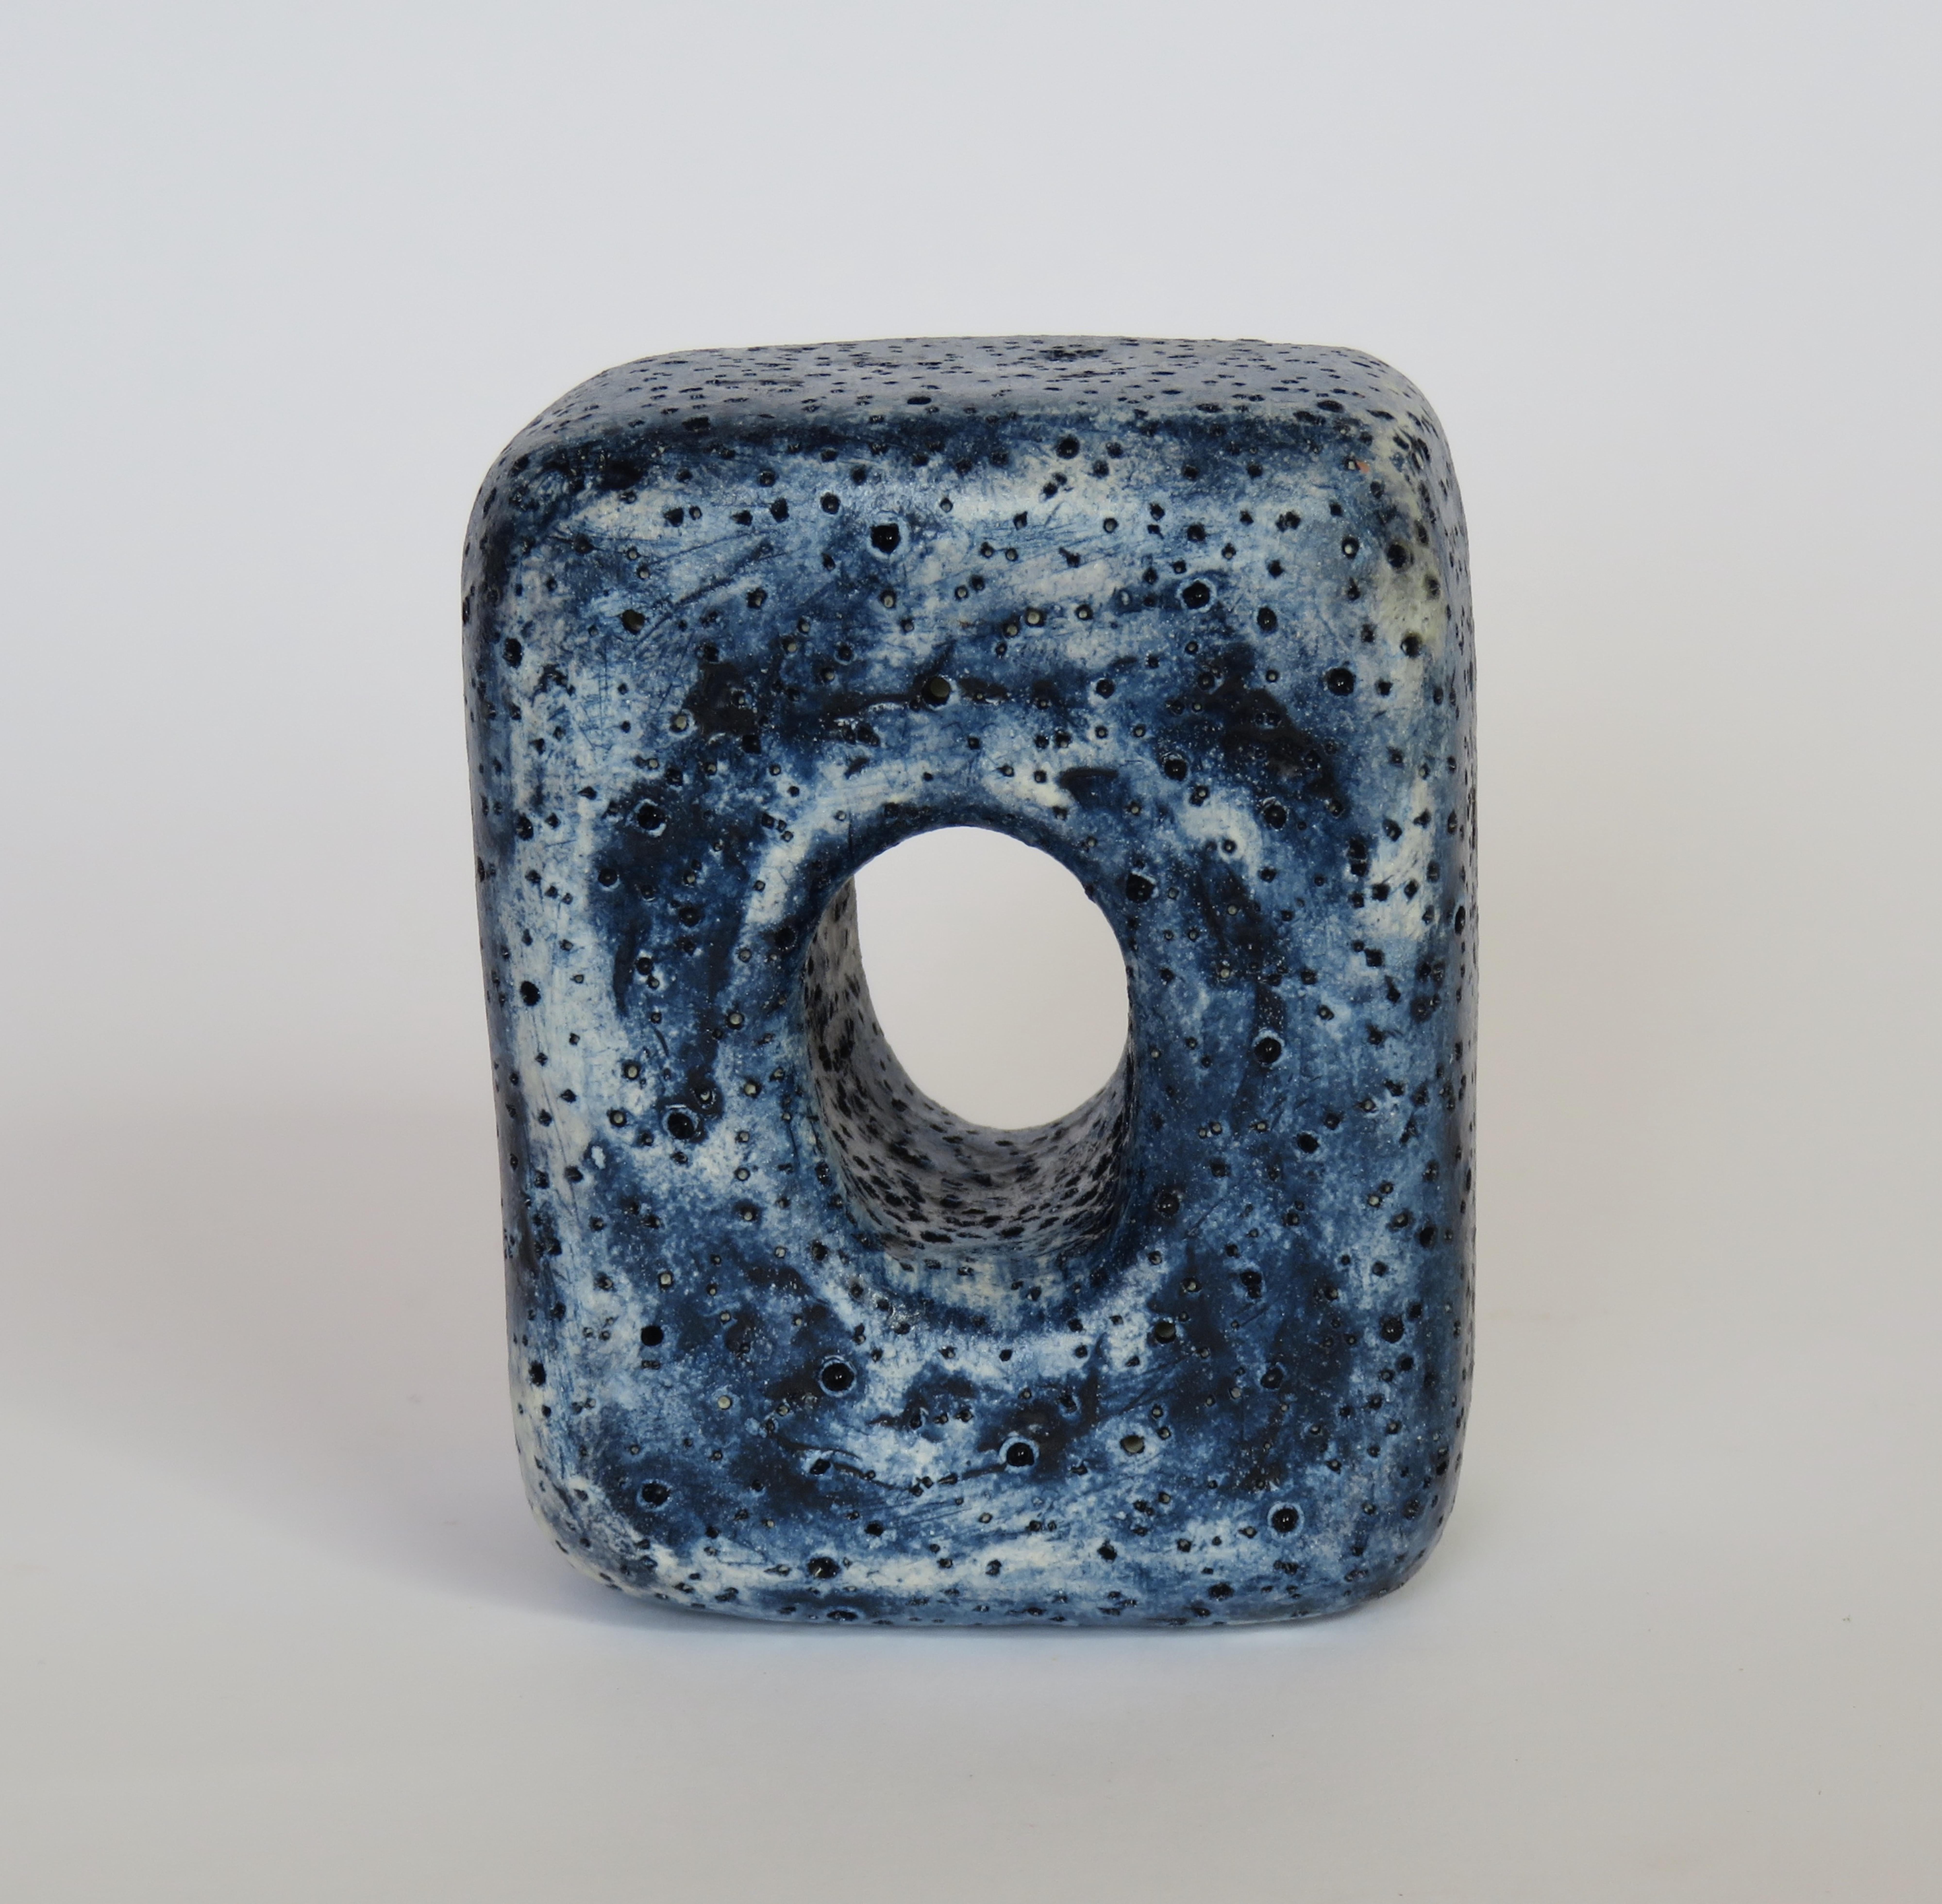 Hand Textured Ceramic Sculpture, Oblong Cube with Oval Opening in Deep Blue Wash 6